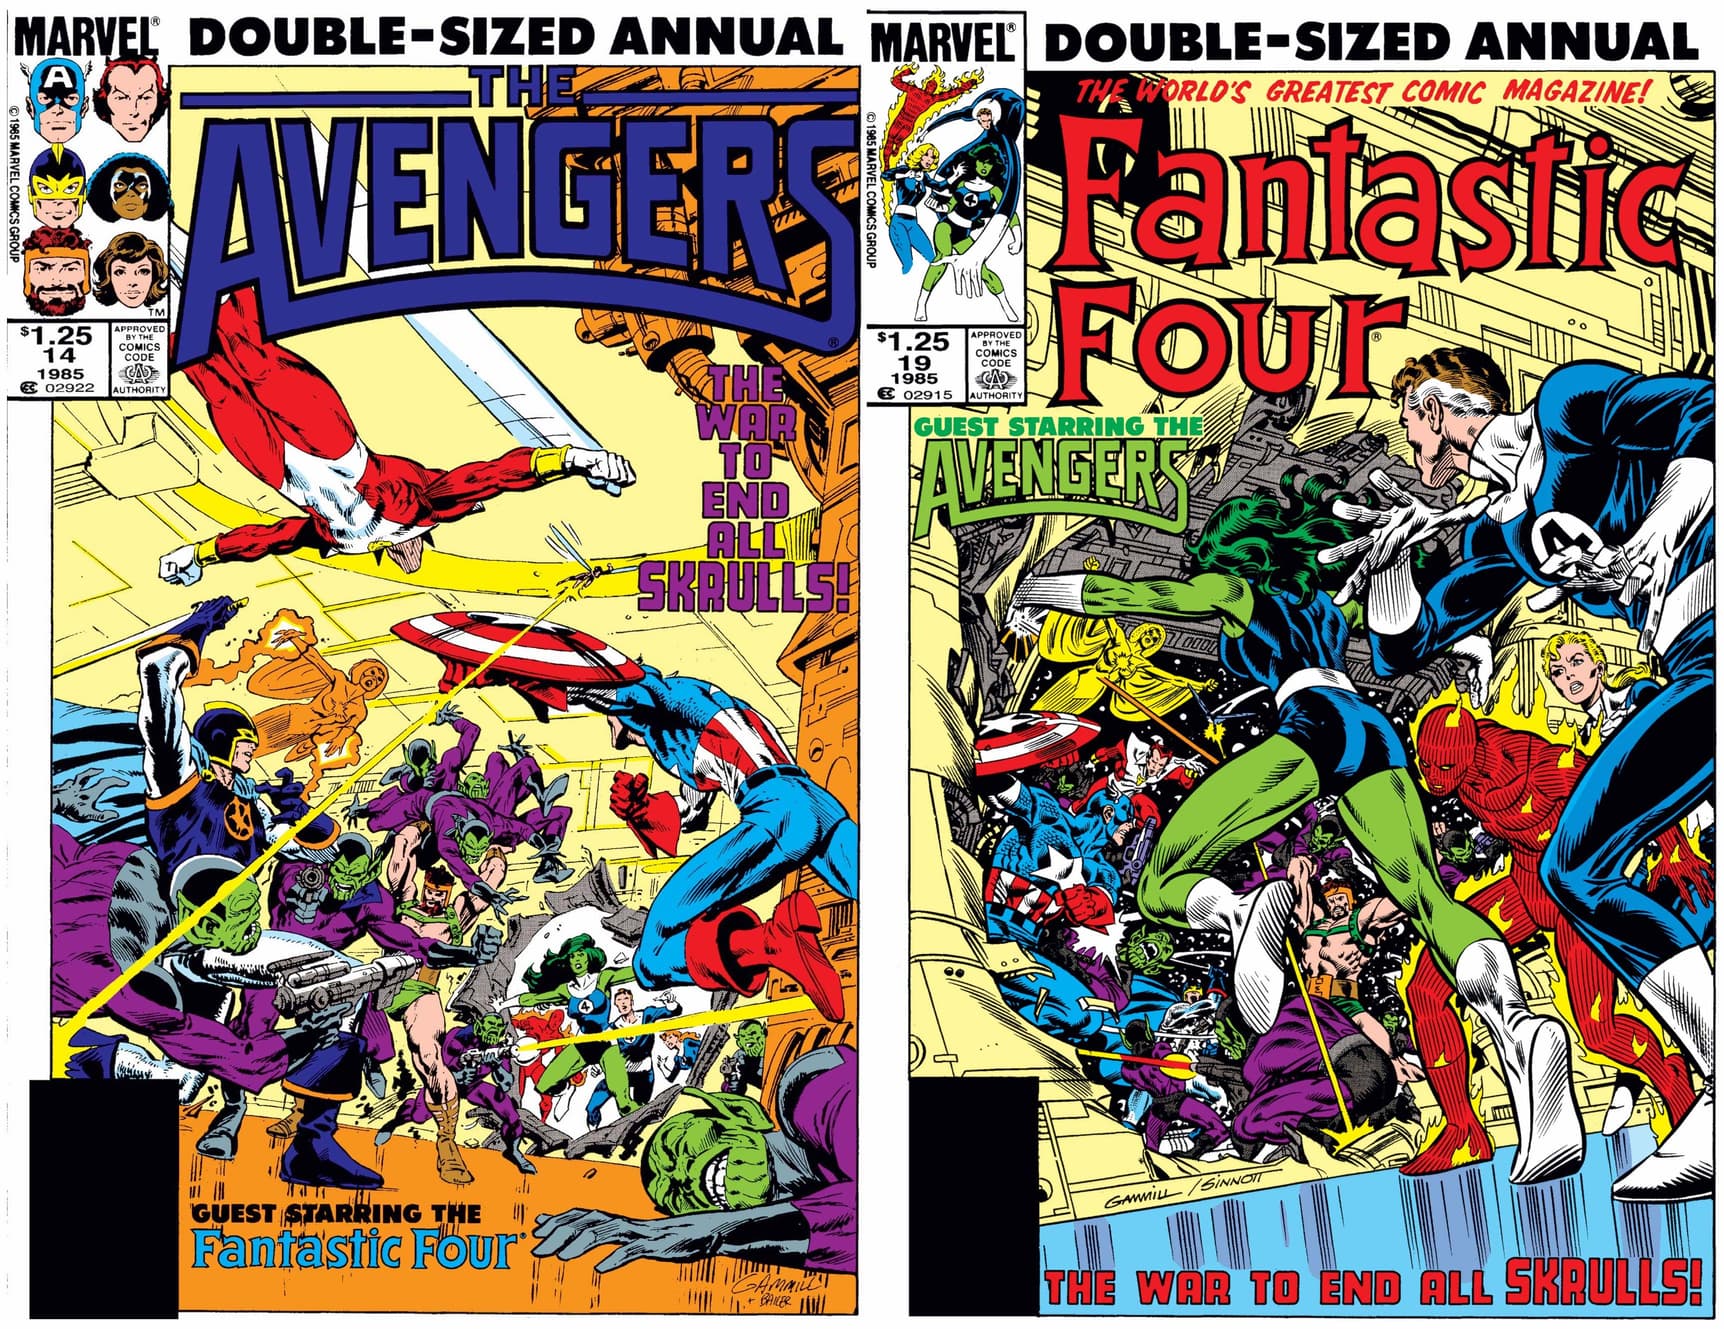 AVENGERS ANNUAL (1967) #14 and FANTASTIC FOUR ANNUAL (1963) #19